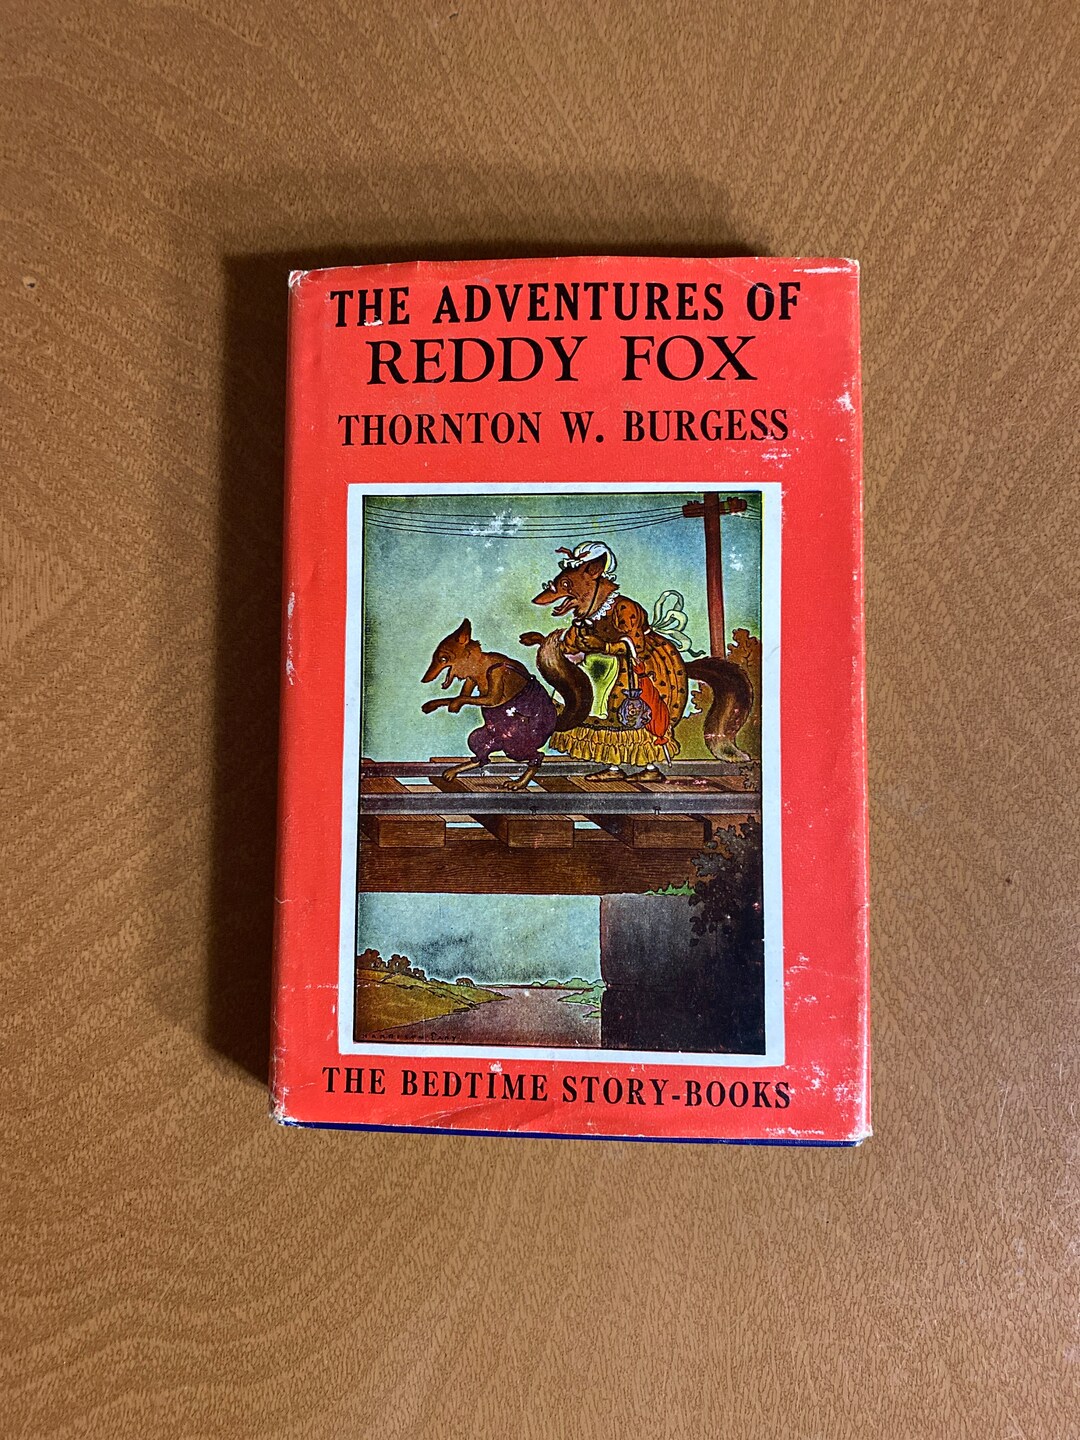 The Adventures of Reddy Fox Thornton W. Burgess the Bedtime Story-books ...